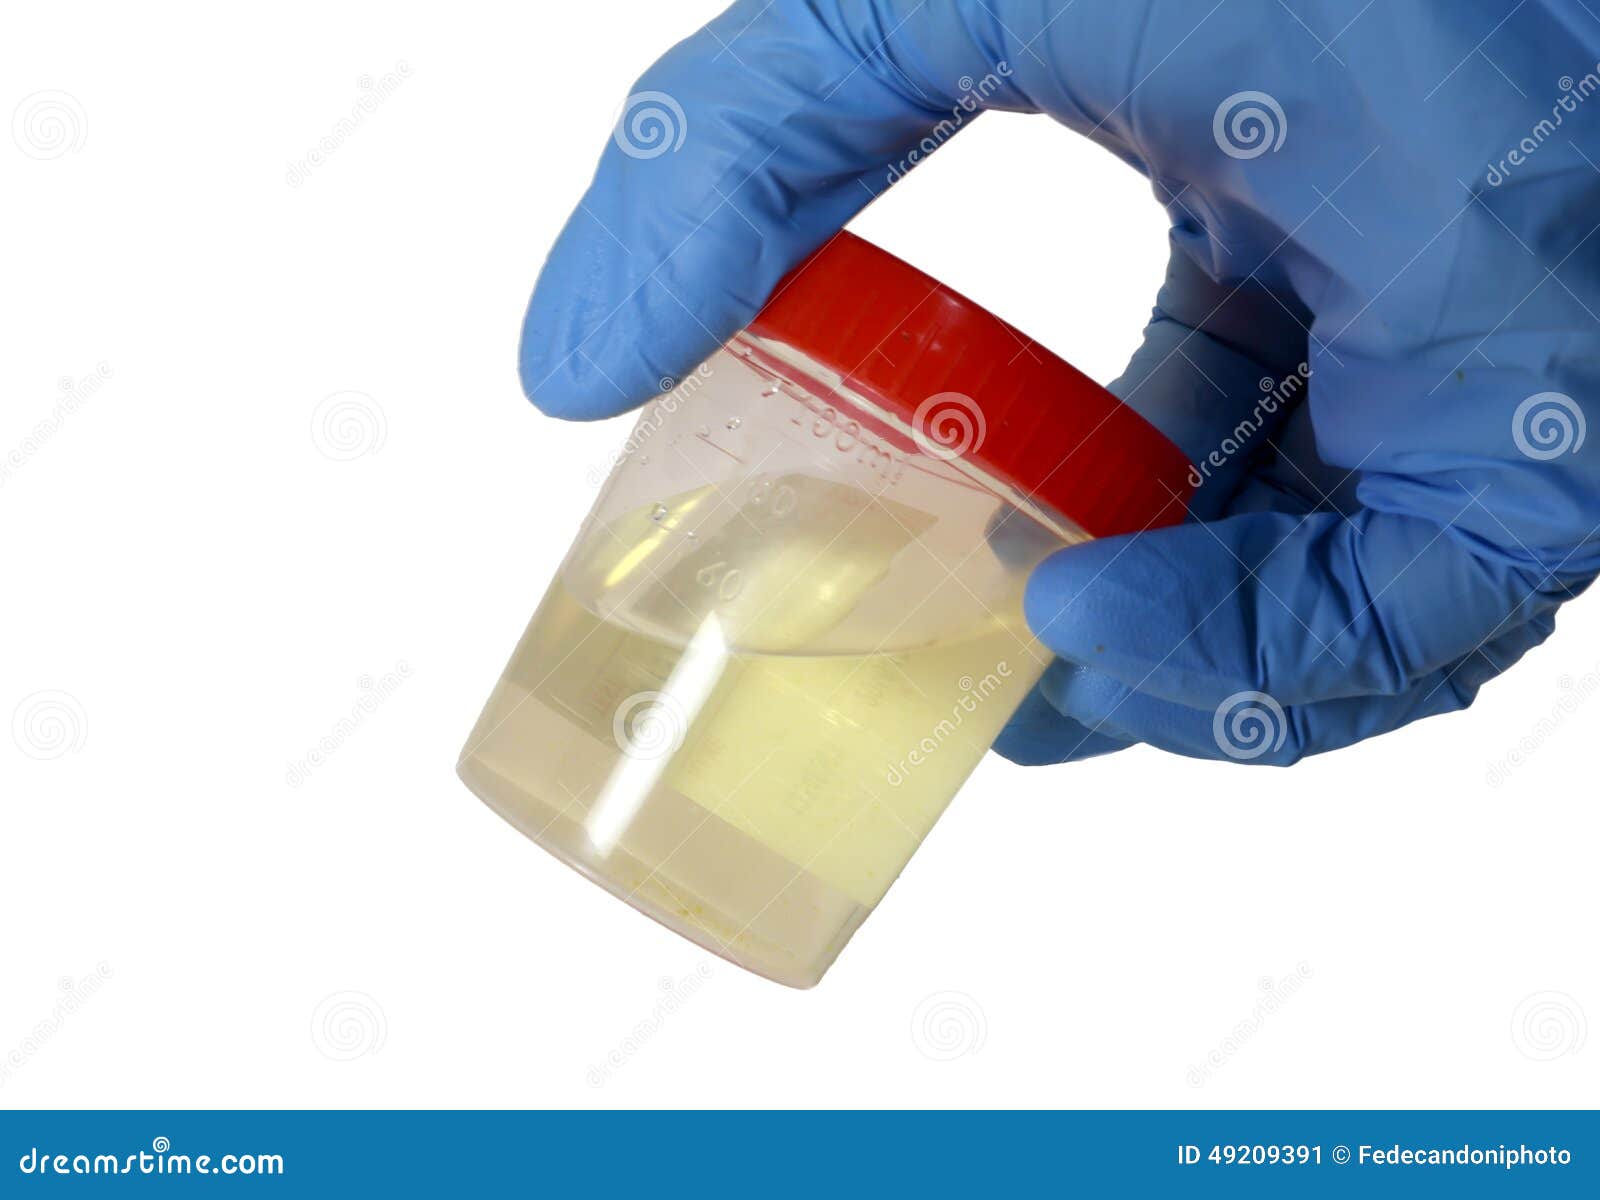 container for urinalysis in the hand of the doctor